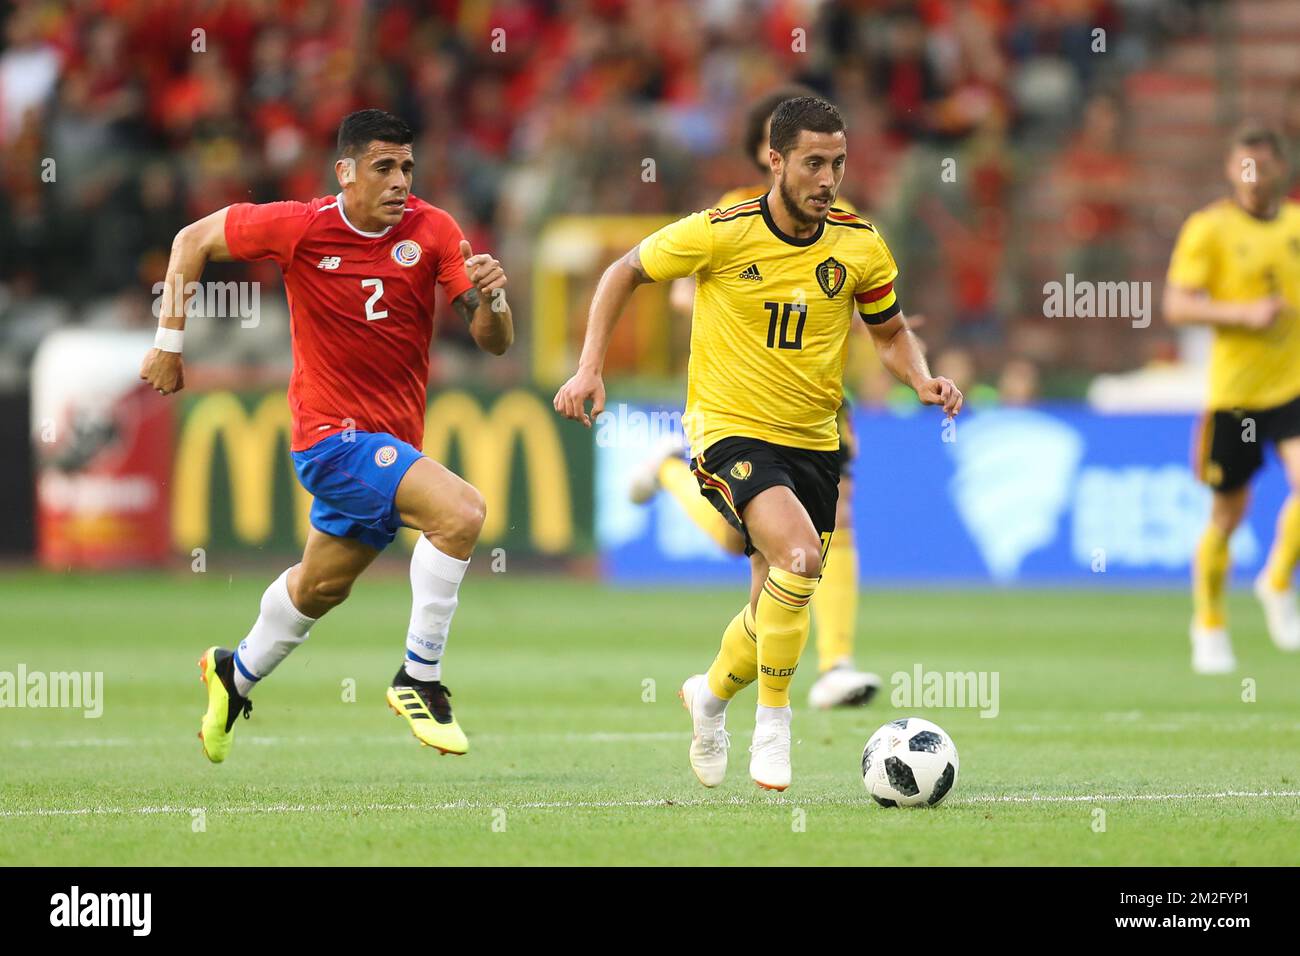 Costa Rica's Johnny Acosta and Belgium's Eden Hazard fight for the ball during a friendly soccer game between Belgian national team The Red Devils and Costa Rica, Monday 11 June 2018, in Brussels. Both teams prepare the upcoming FIFA World Cup 2018 in Russia. BELGA PHOTO BRUNO FAHY Stock Photo